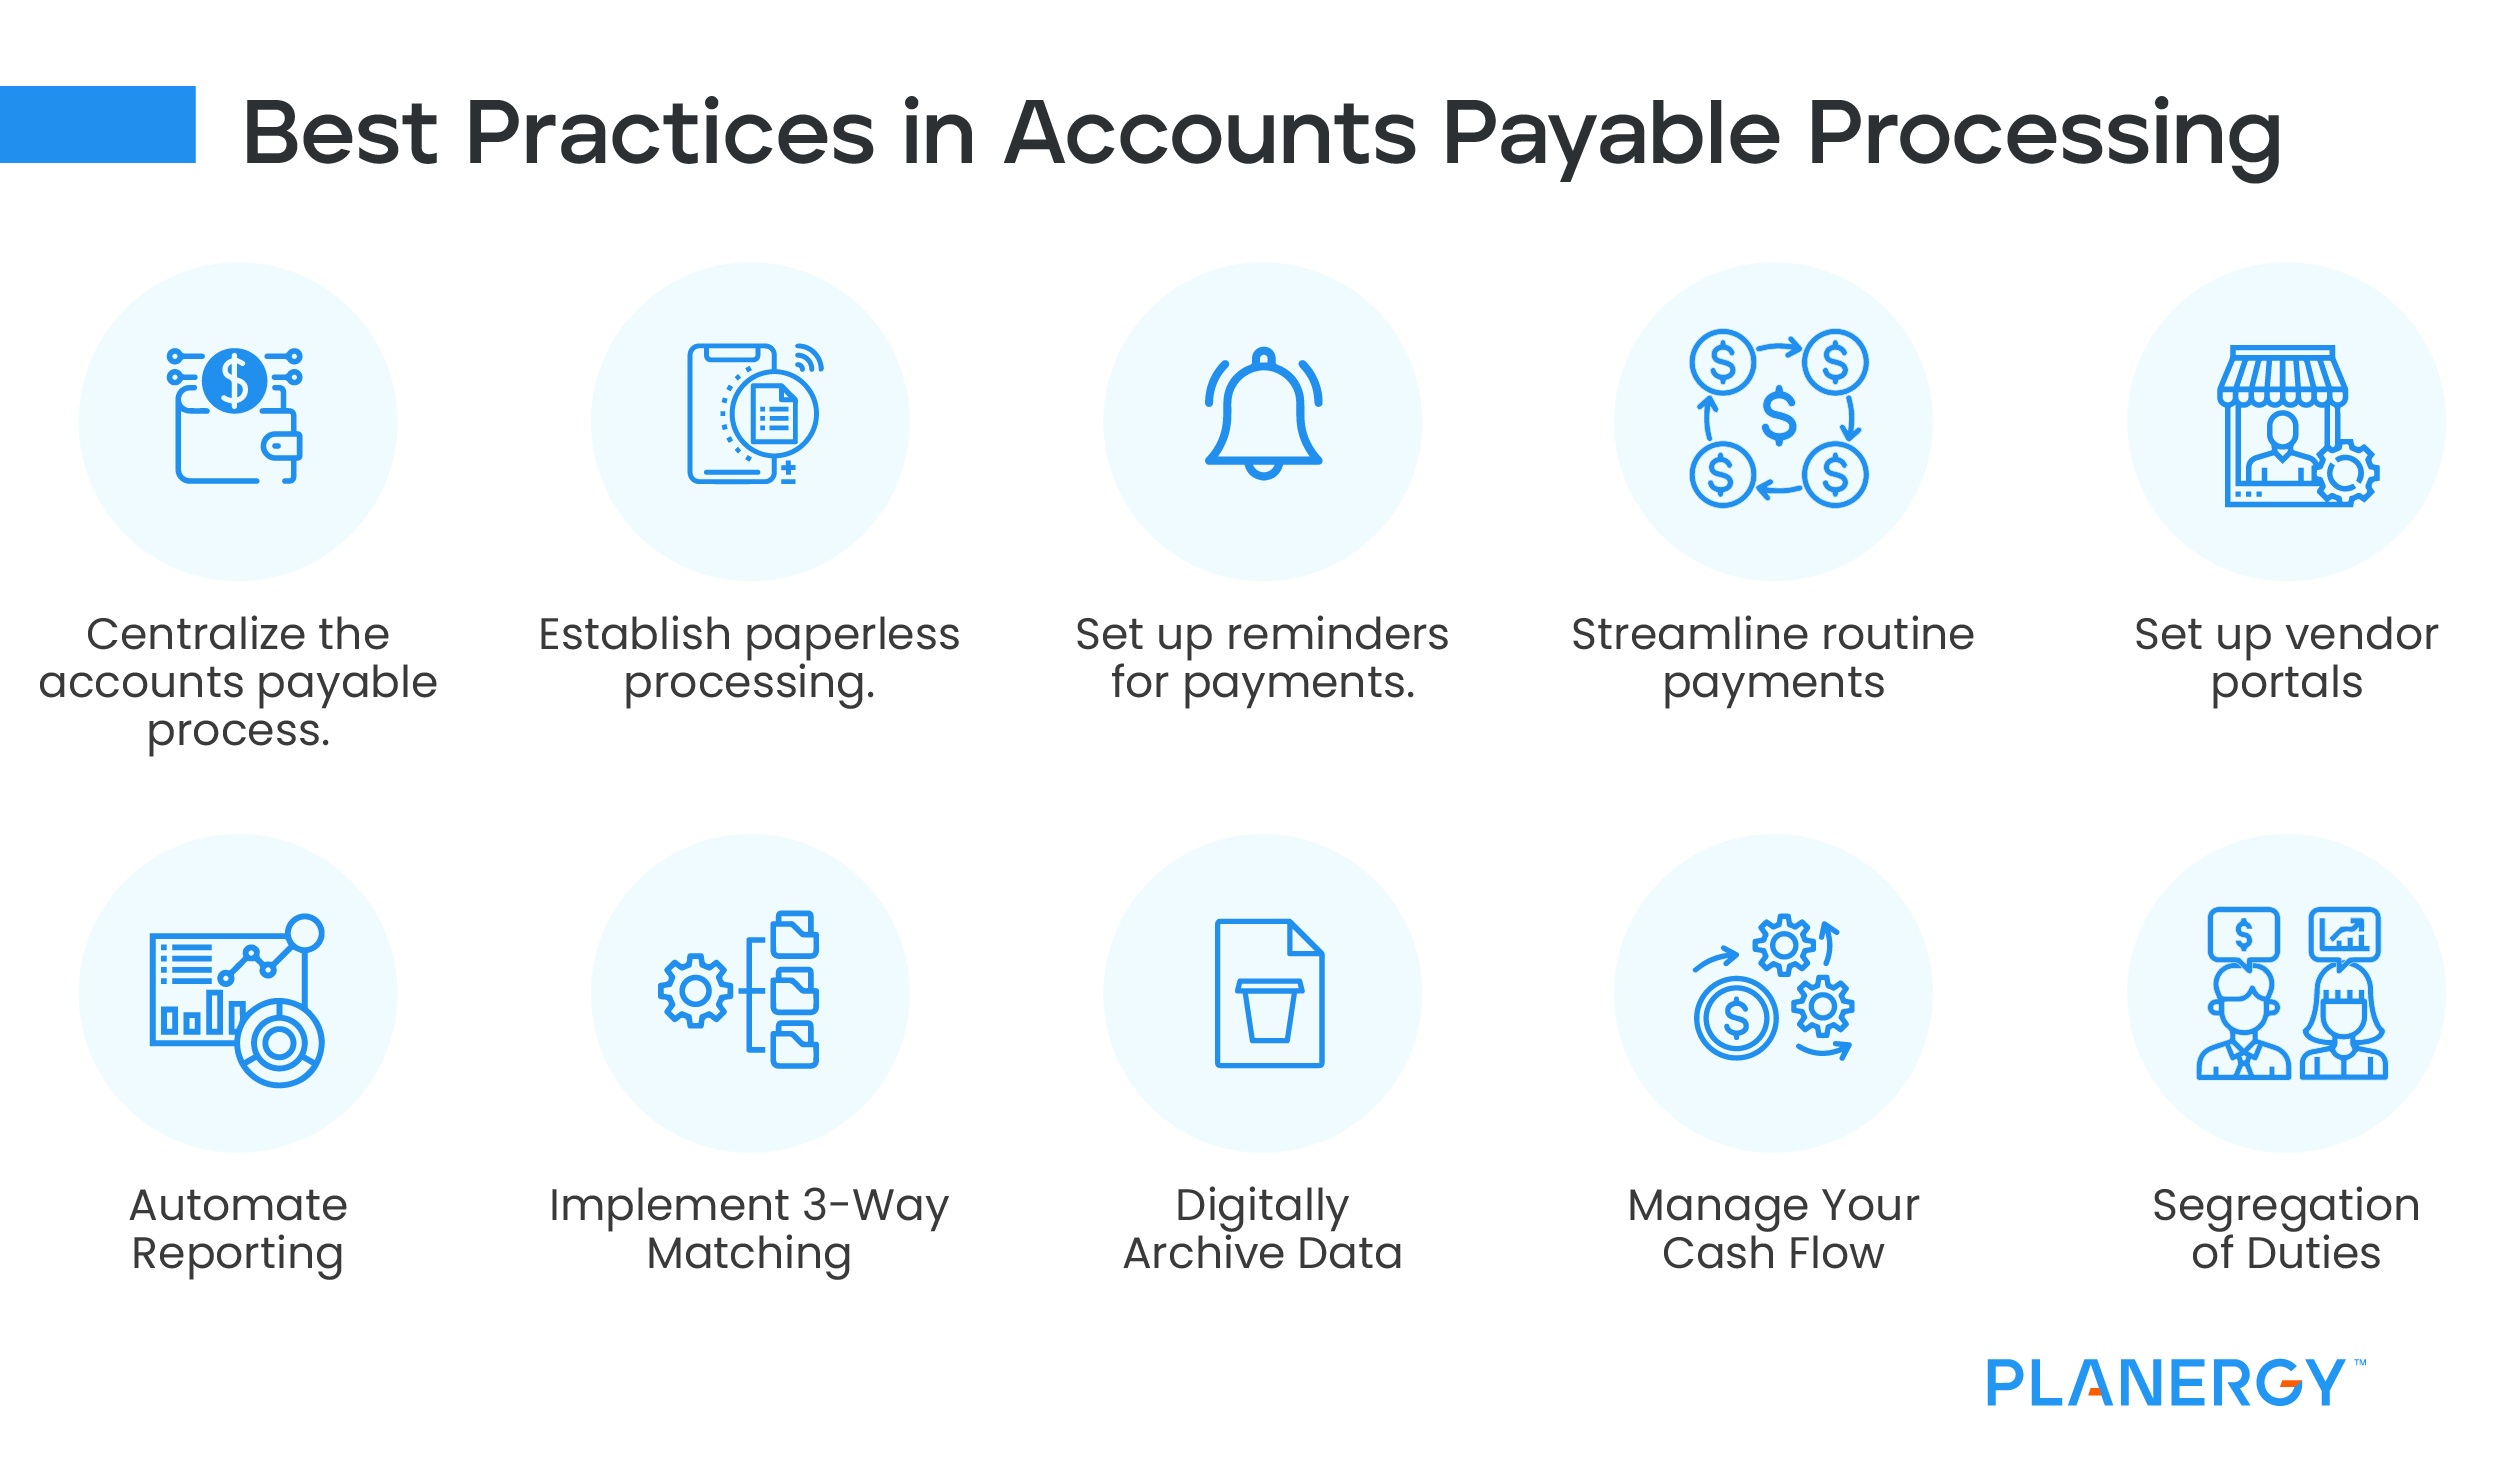 Best Practices in Accounts Payable Processing